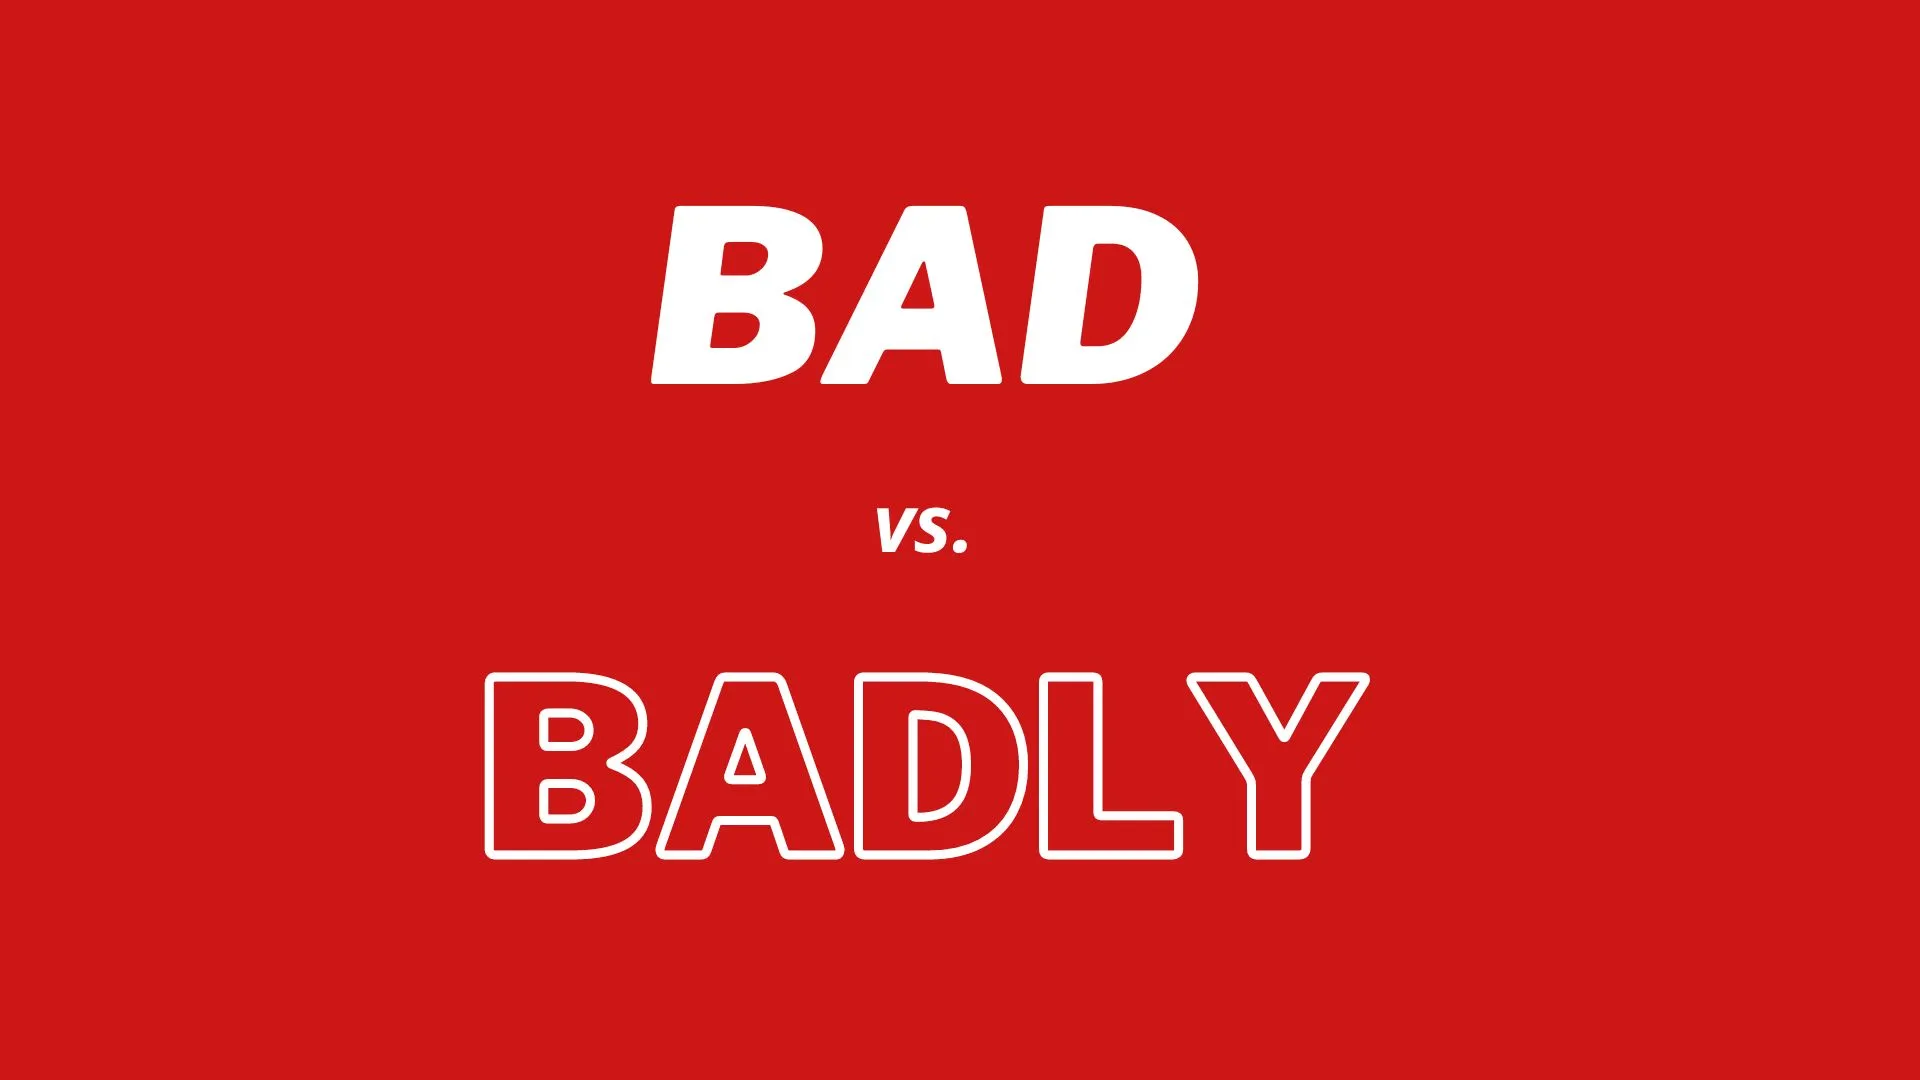 3D image with the definitions of words “bad” and “badly and the explenation differences between them.